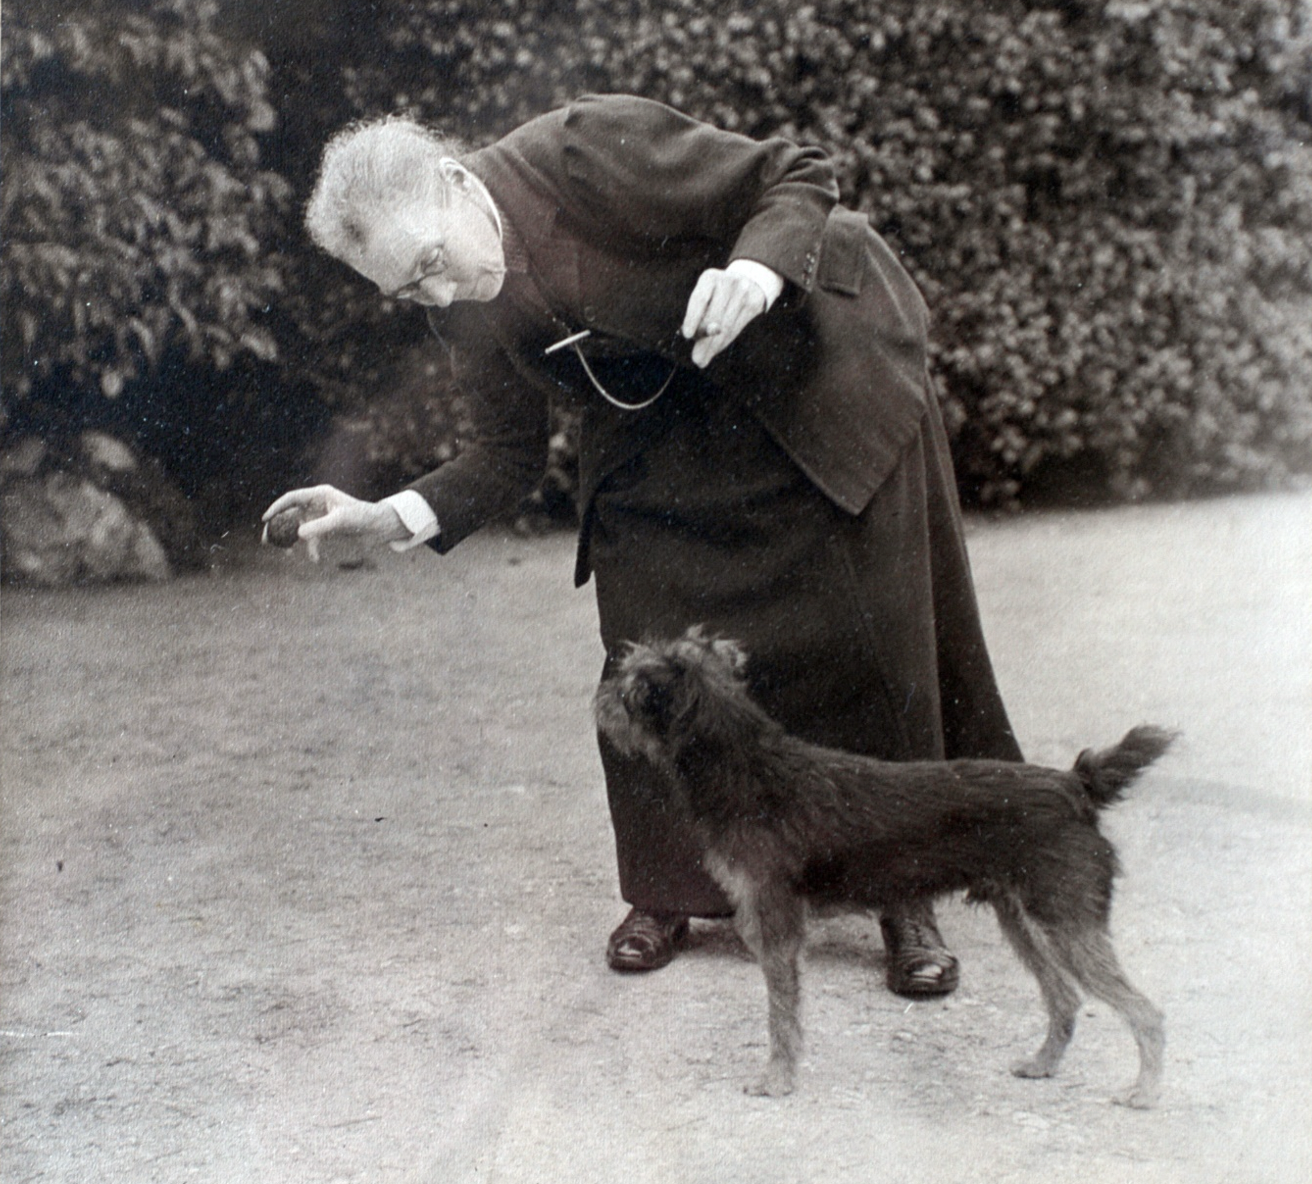 An old photograph of a woman playing with a dog.